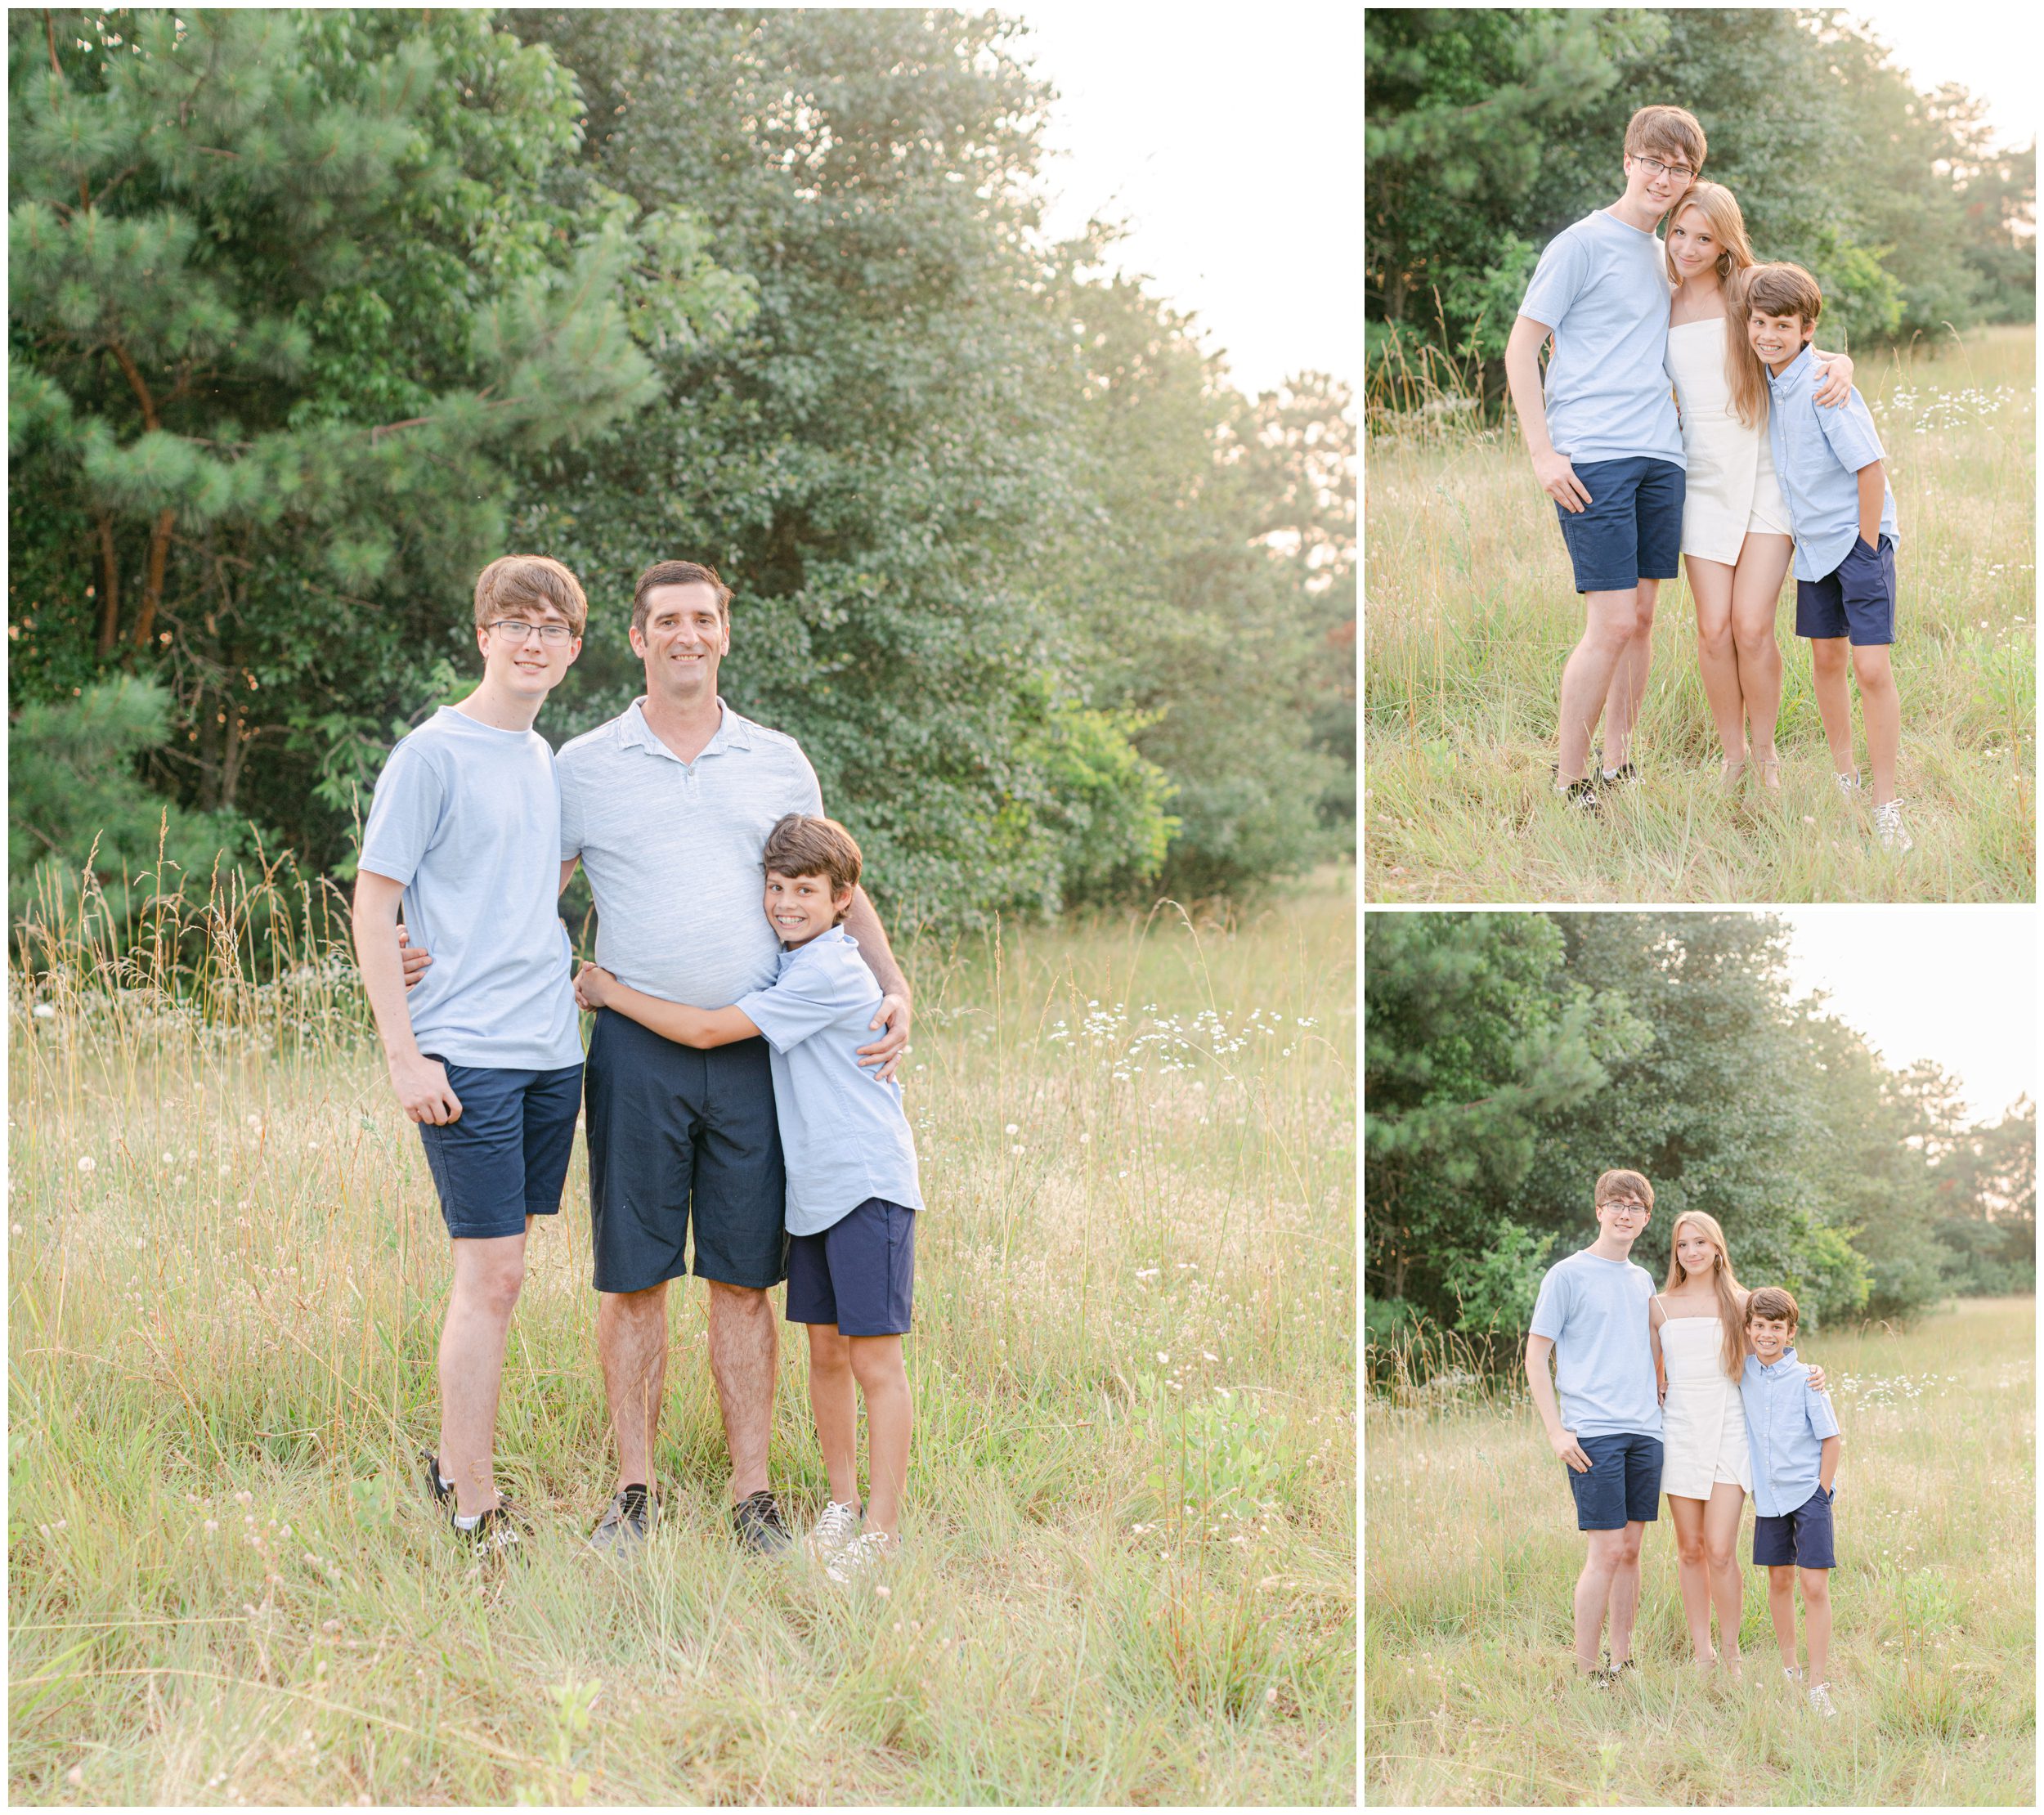 Extended family photographer photos of siblings and dad in a field near Athens, GA